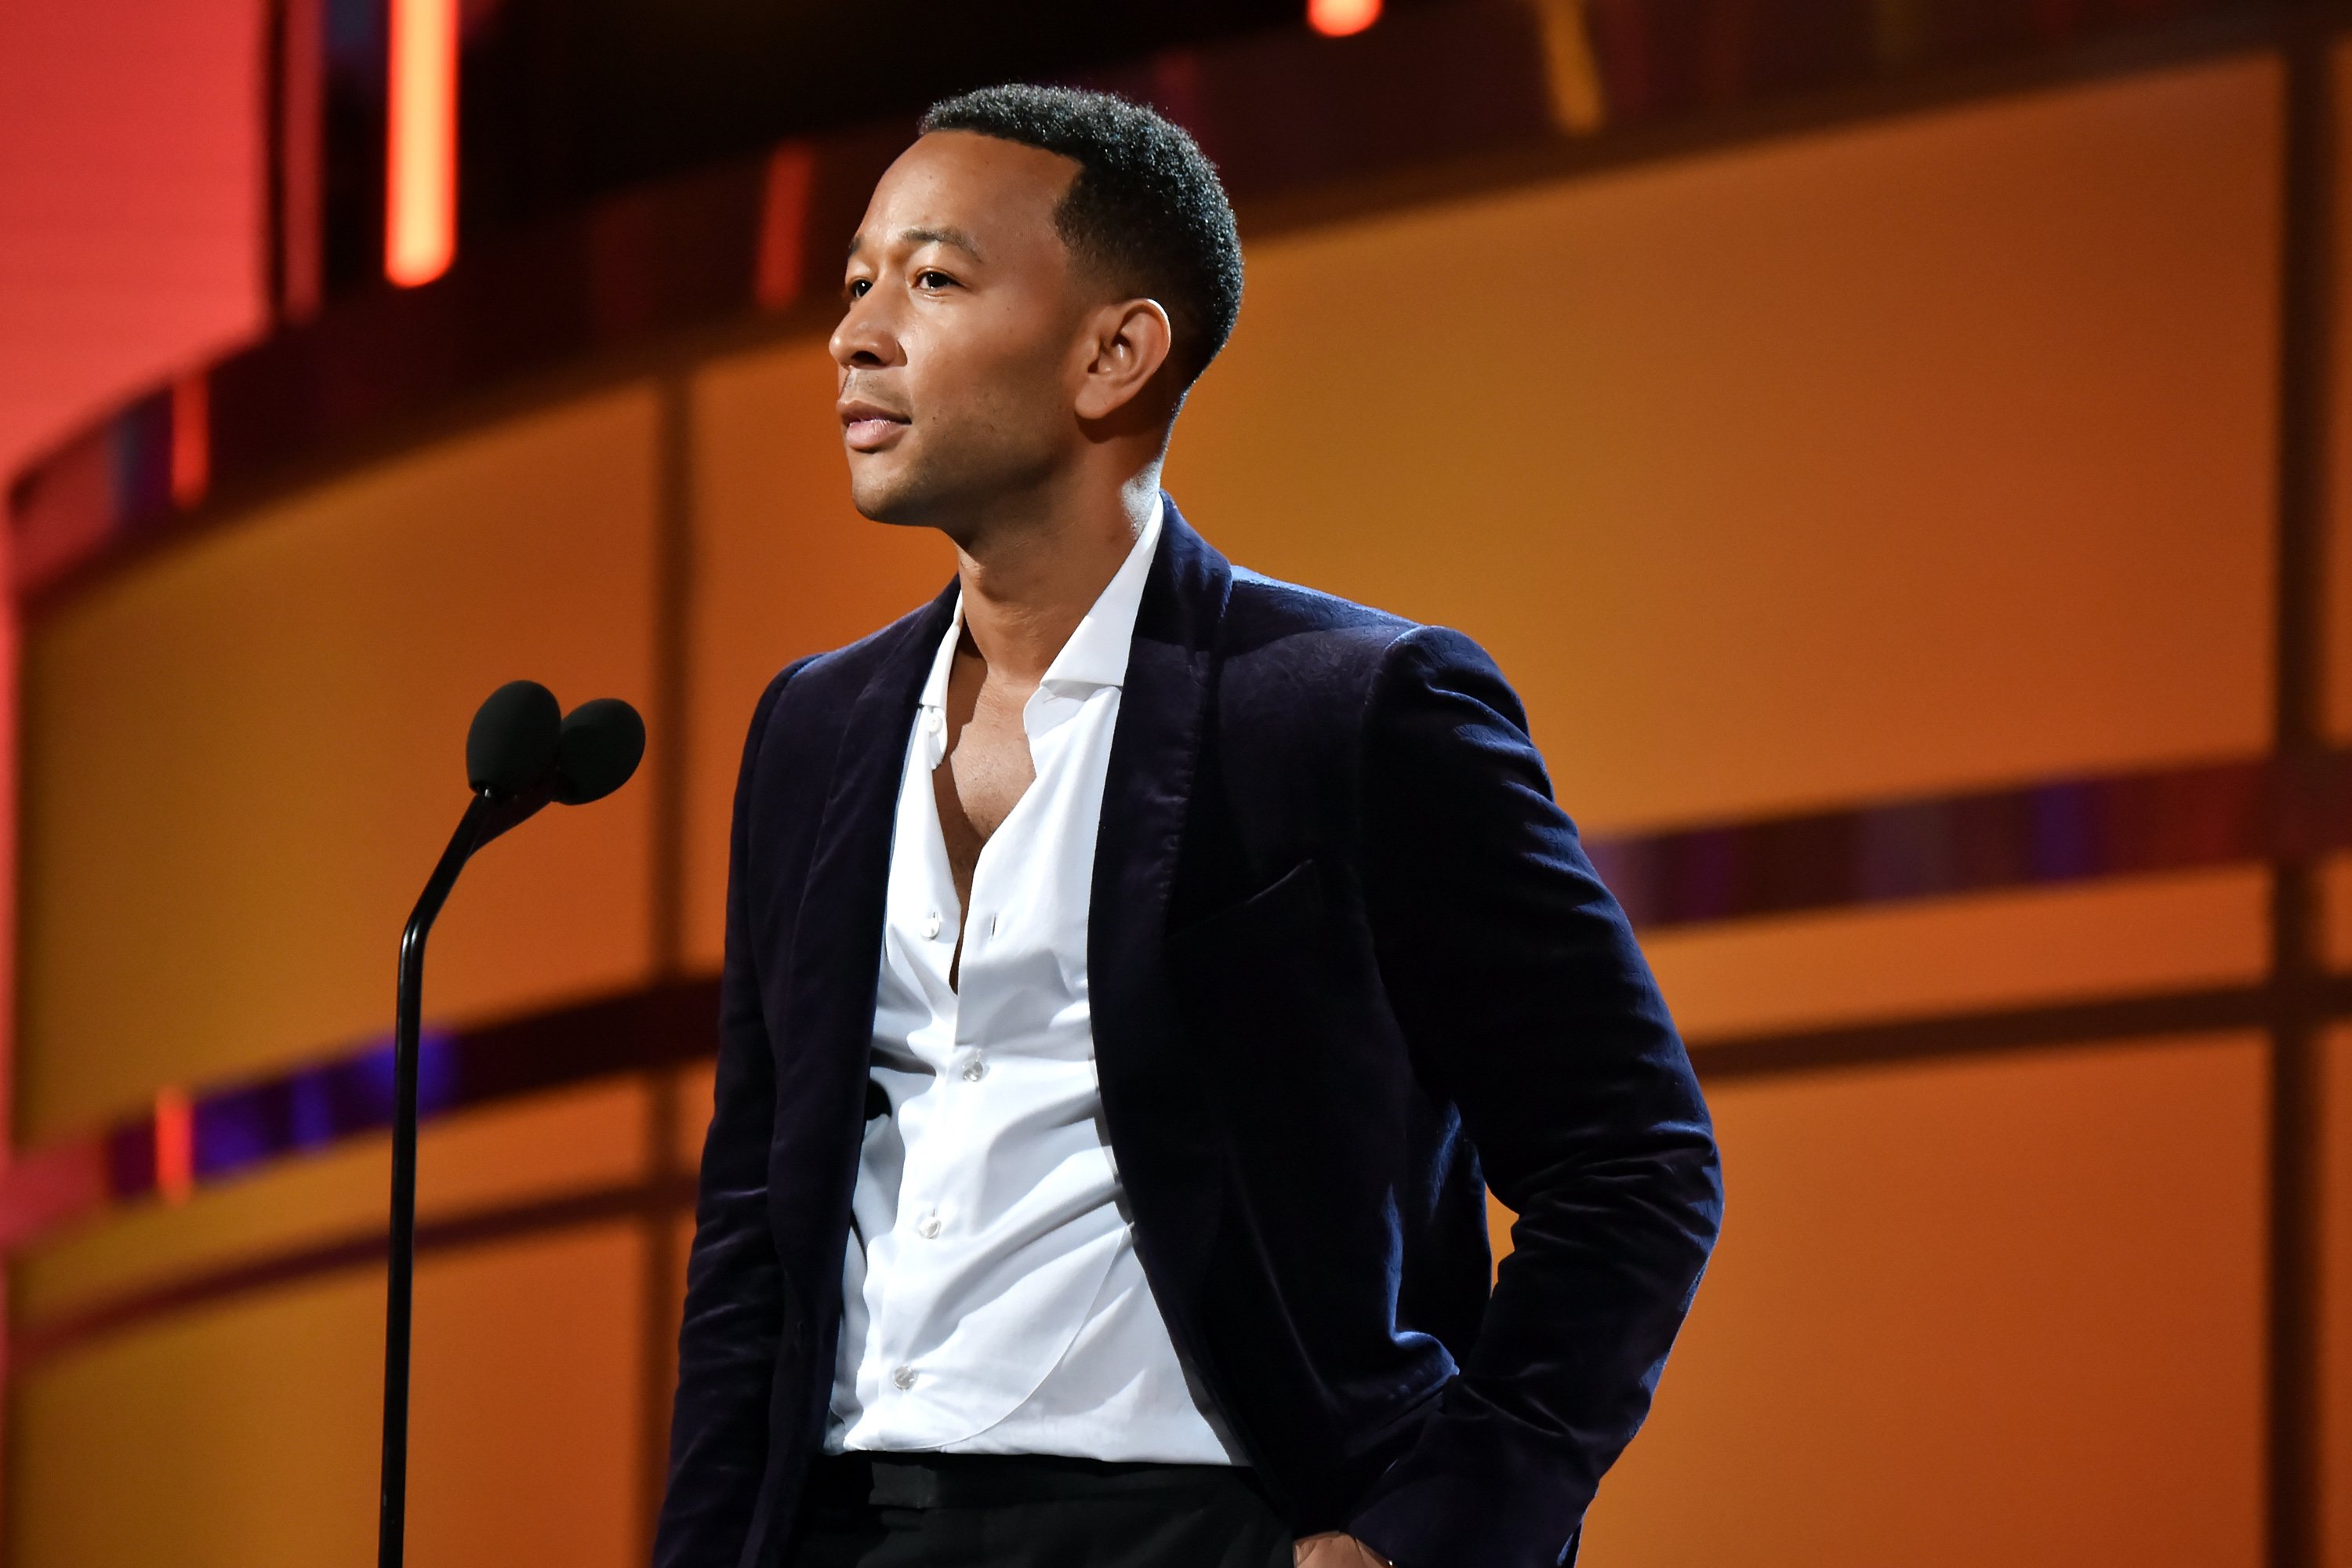 John Legend onstage at the 2018 BET Awards in Los Angeles, California on June 24, 2018 | Photo: Getty Images